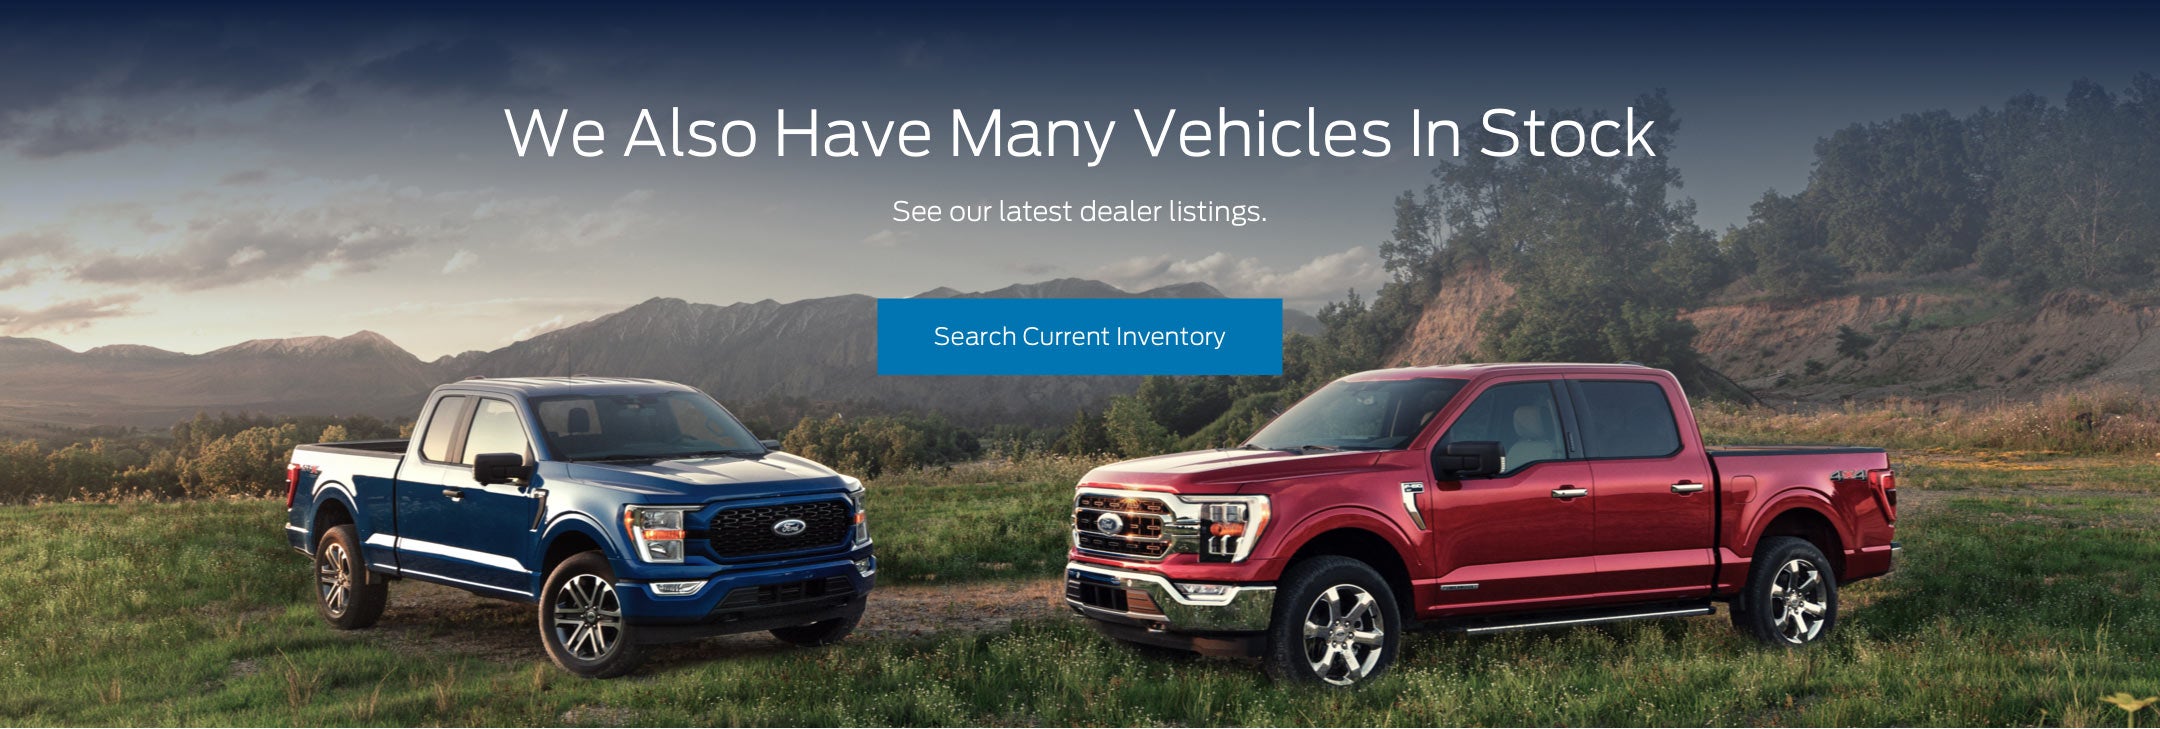 Ford vehicles in stock | All American Ford of Hackensack in Hackensack NJ